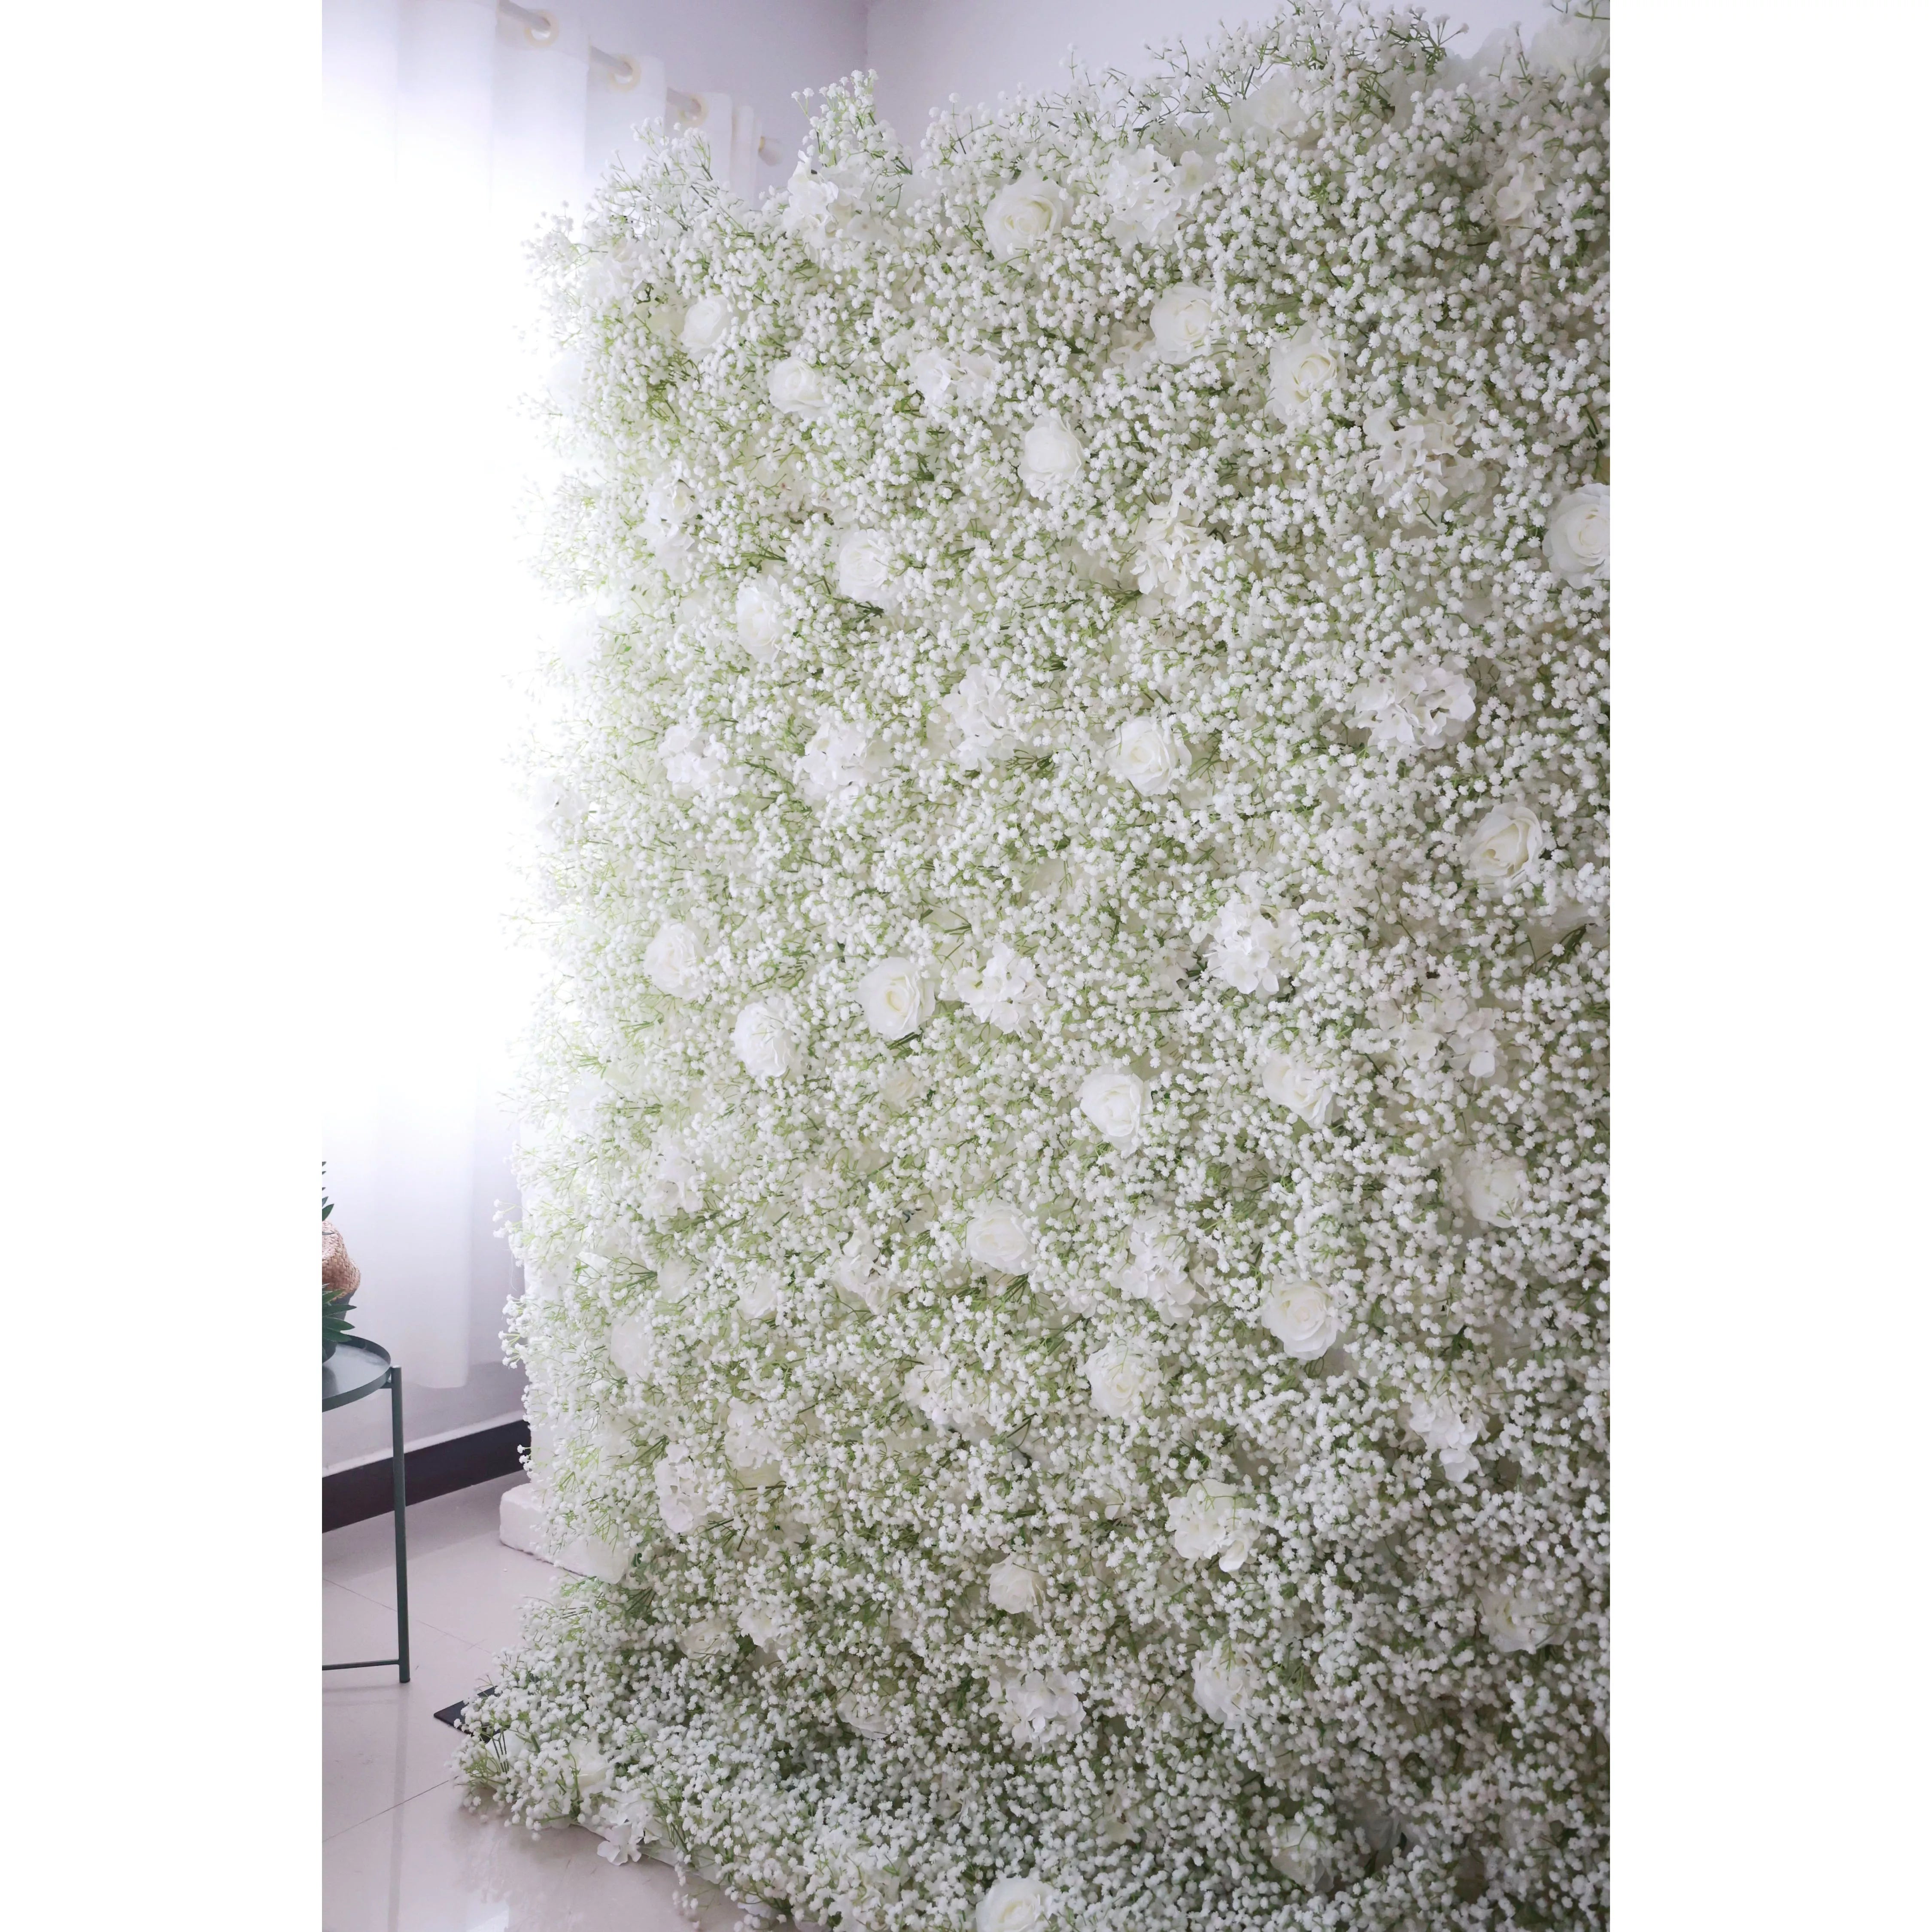 ValarFlower Artificial Floral Wall Backdrop: Elysian Garden Artificial Floral Wall Backdrop: Ethereal White Blossoms Edition-VF-268